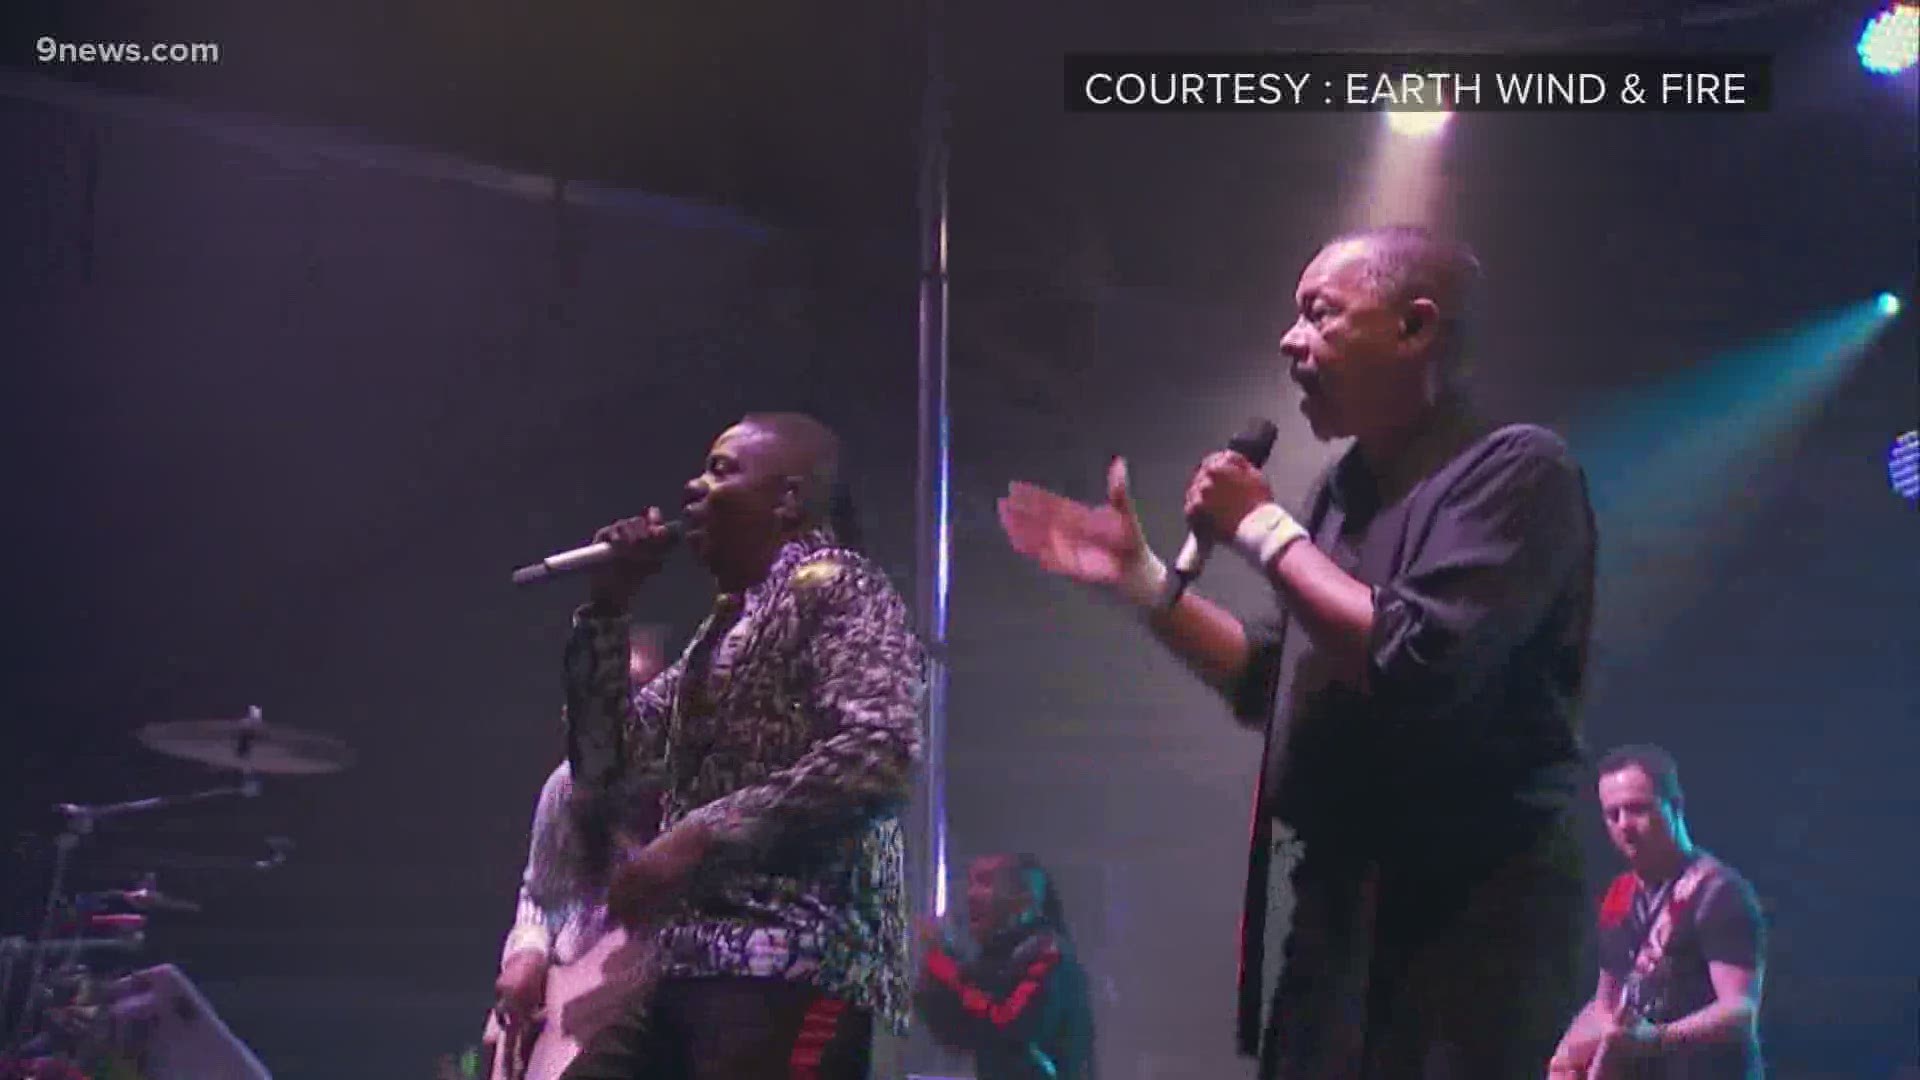 The Earth, Wind & Fire star is raising money and reflecting on the bands canceled tour.